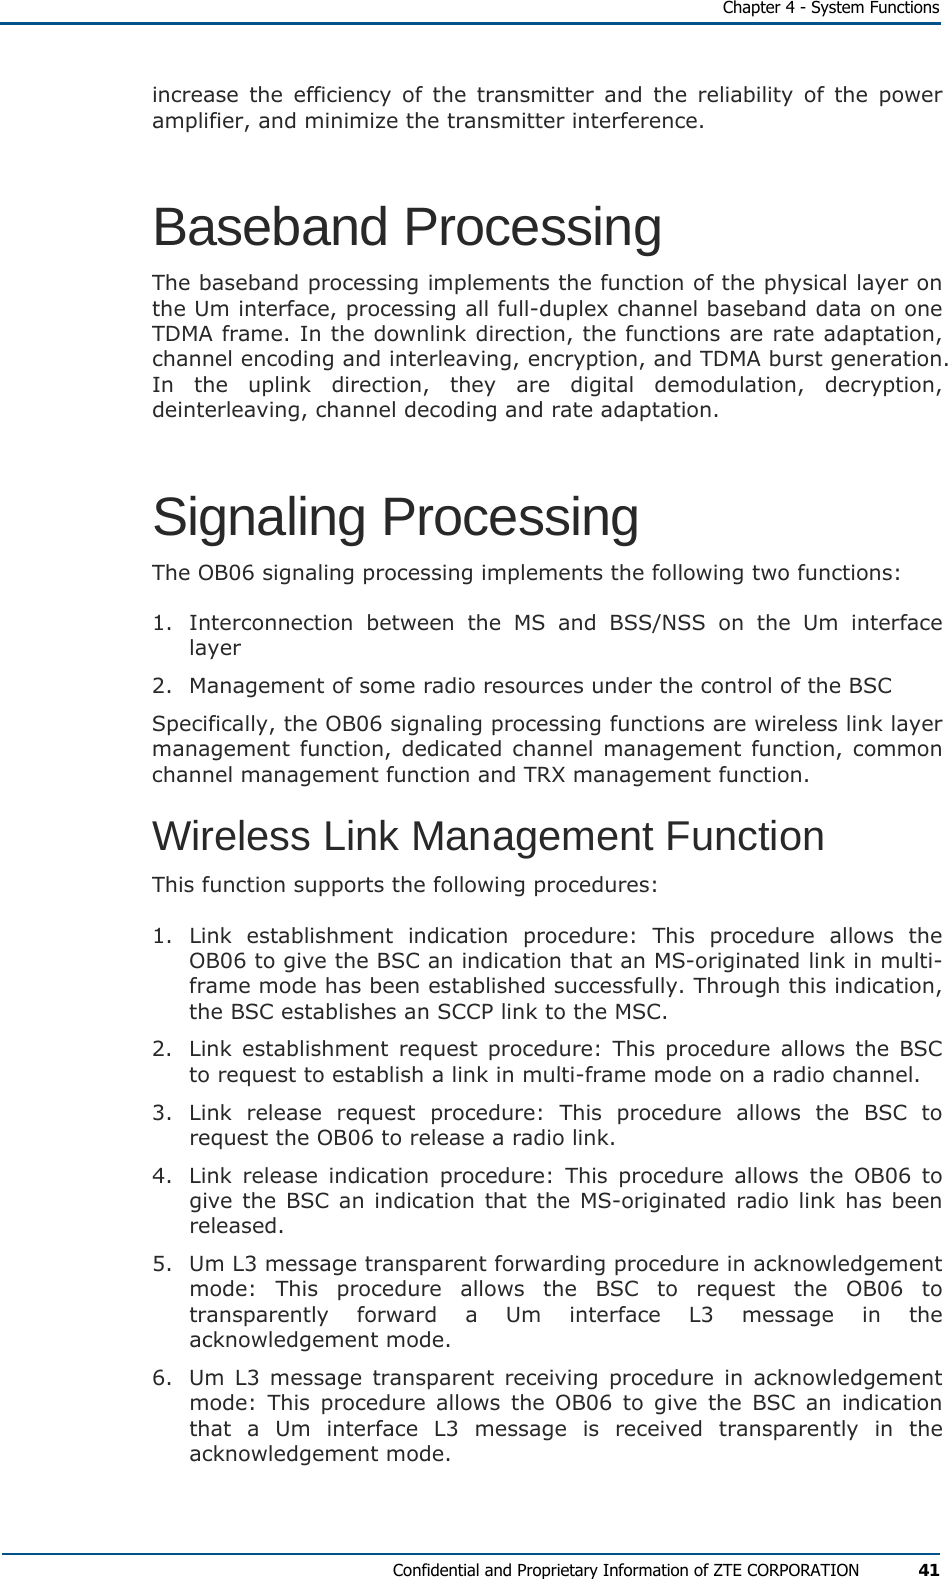   Chapter 4 - System Functions Confidential and Proprietary Information of ZTE CORPORATION 41 increase the efficiency of the transmitter and the reliability of the power amplifier, and minimize the transmitter interference. Baseband Processing The baseband processing implements the function of the physical layer on the Um interface, processing all full-duplex channel baseband data on one TDMA frame. In the downlink direction, the functions are rate adaptation, channel encoding and interleaving, encryption, and TDMA burst generation. In the uplink direction, they are digital demodulation, decryption, deinterleaving, channel decoding and rate adaptation. Signaling Processing The OB06 signaling processing implements the following two functions: 1.  Interconnection between the MS and BSS/NSS on the Um interface layer 2.  Management of some radio resources under the control of the BSC Specifically, the OB06 signaling processing functions are wireless link layer management function, dedicated channel management function, common channel management function and TRX management function. Wireless Link Management Function This function supports the following procedures: 1. Link establishment indication procedure: This procedure allows the OB06 to give the BSC an indication that an MS-originated link in multi-frame mode has been established successfully. Through this indication, the BSC establishes an SCCP link to the MSC. 2.  Link establishment request procedure: This procedure allows the BSC to request to establish a link in multi-frame mode on a radio channel. 3. Link release request procedure: This procedure allows the BSC to request the OB06 to release a radio link. 4.  Link release indication procedure: This procedure allows the OB06 to give the BSC an indication that the MS-originated radio link has been released. 5.  Um L3 message transparent forwarding procedure in acknowledgement mode: This procedure allows the BSC to request the OB06 to transparently forward a Um interface L3 message in the acknowledgement mode. 6.  Um L3 message transparent receiving procedure in acknowledgement mode: This procedure allows the OB06 to give the BSC an indication that a Um interface L3 message is received transparently in the acknowledgement mode. 